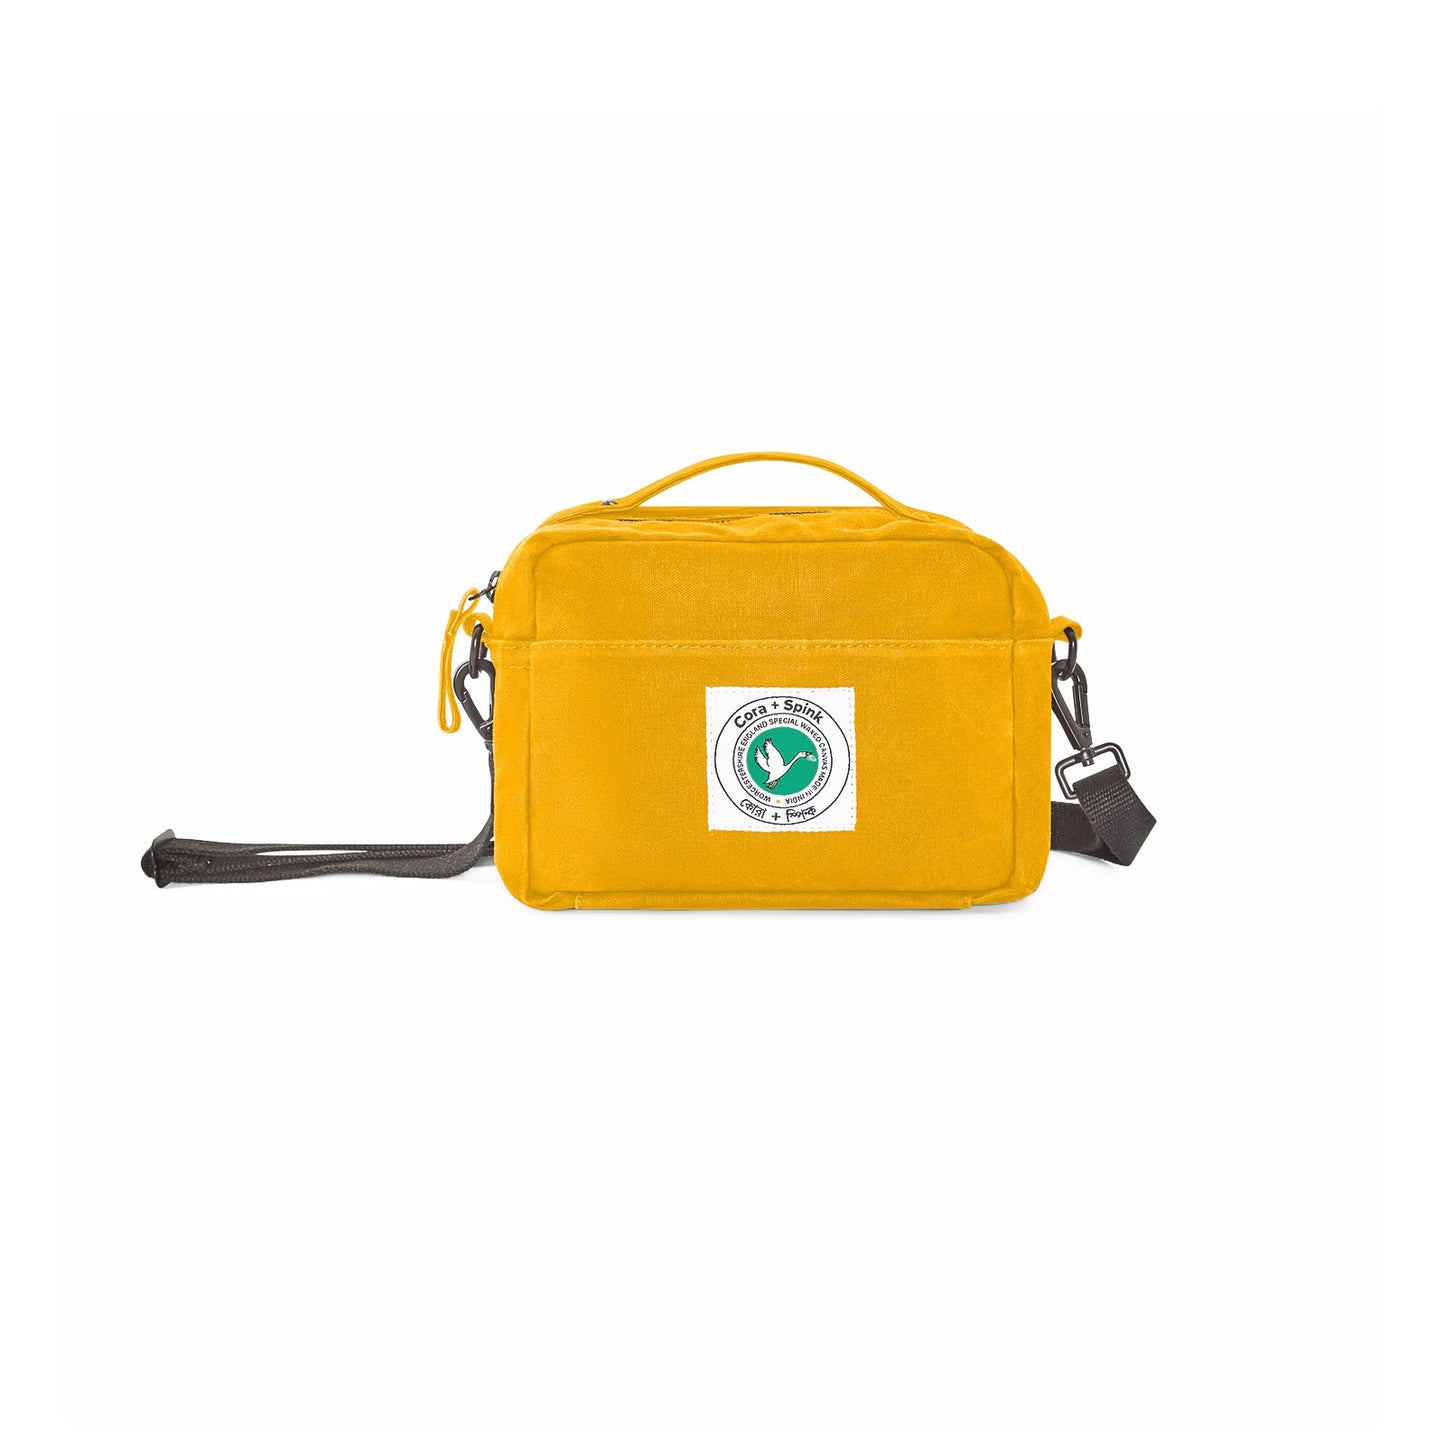 Fonthill Utility Bag in Yellow